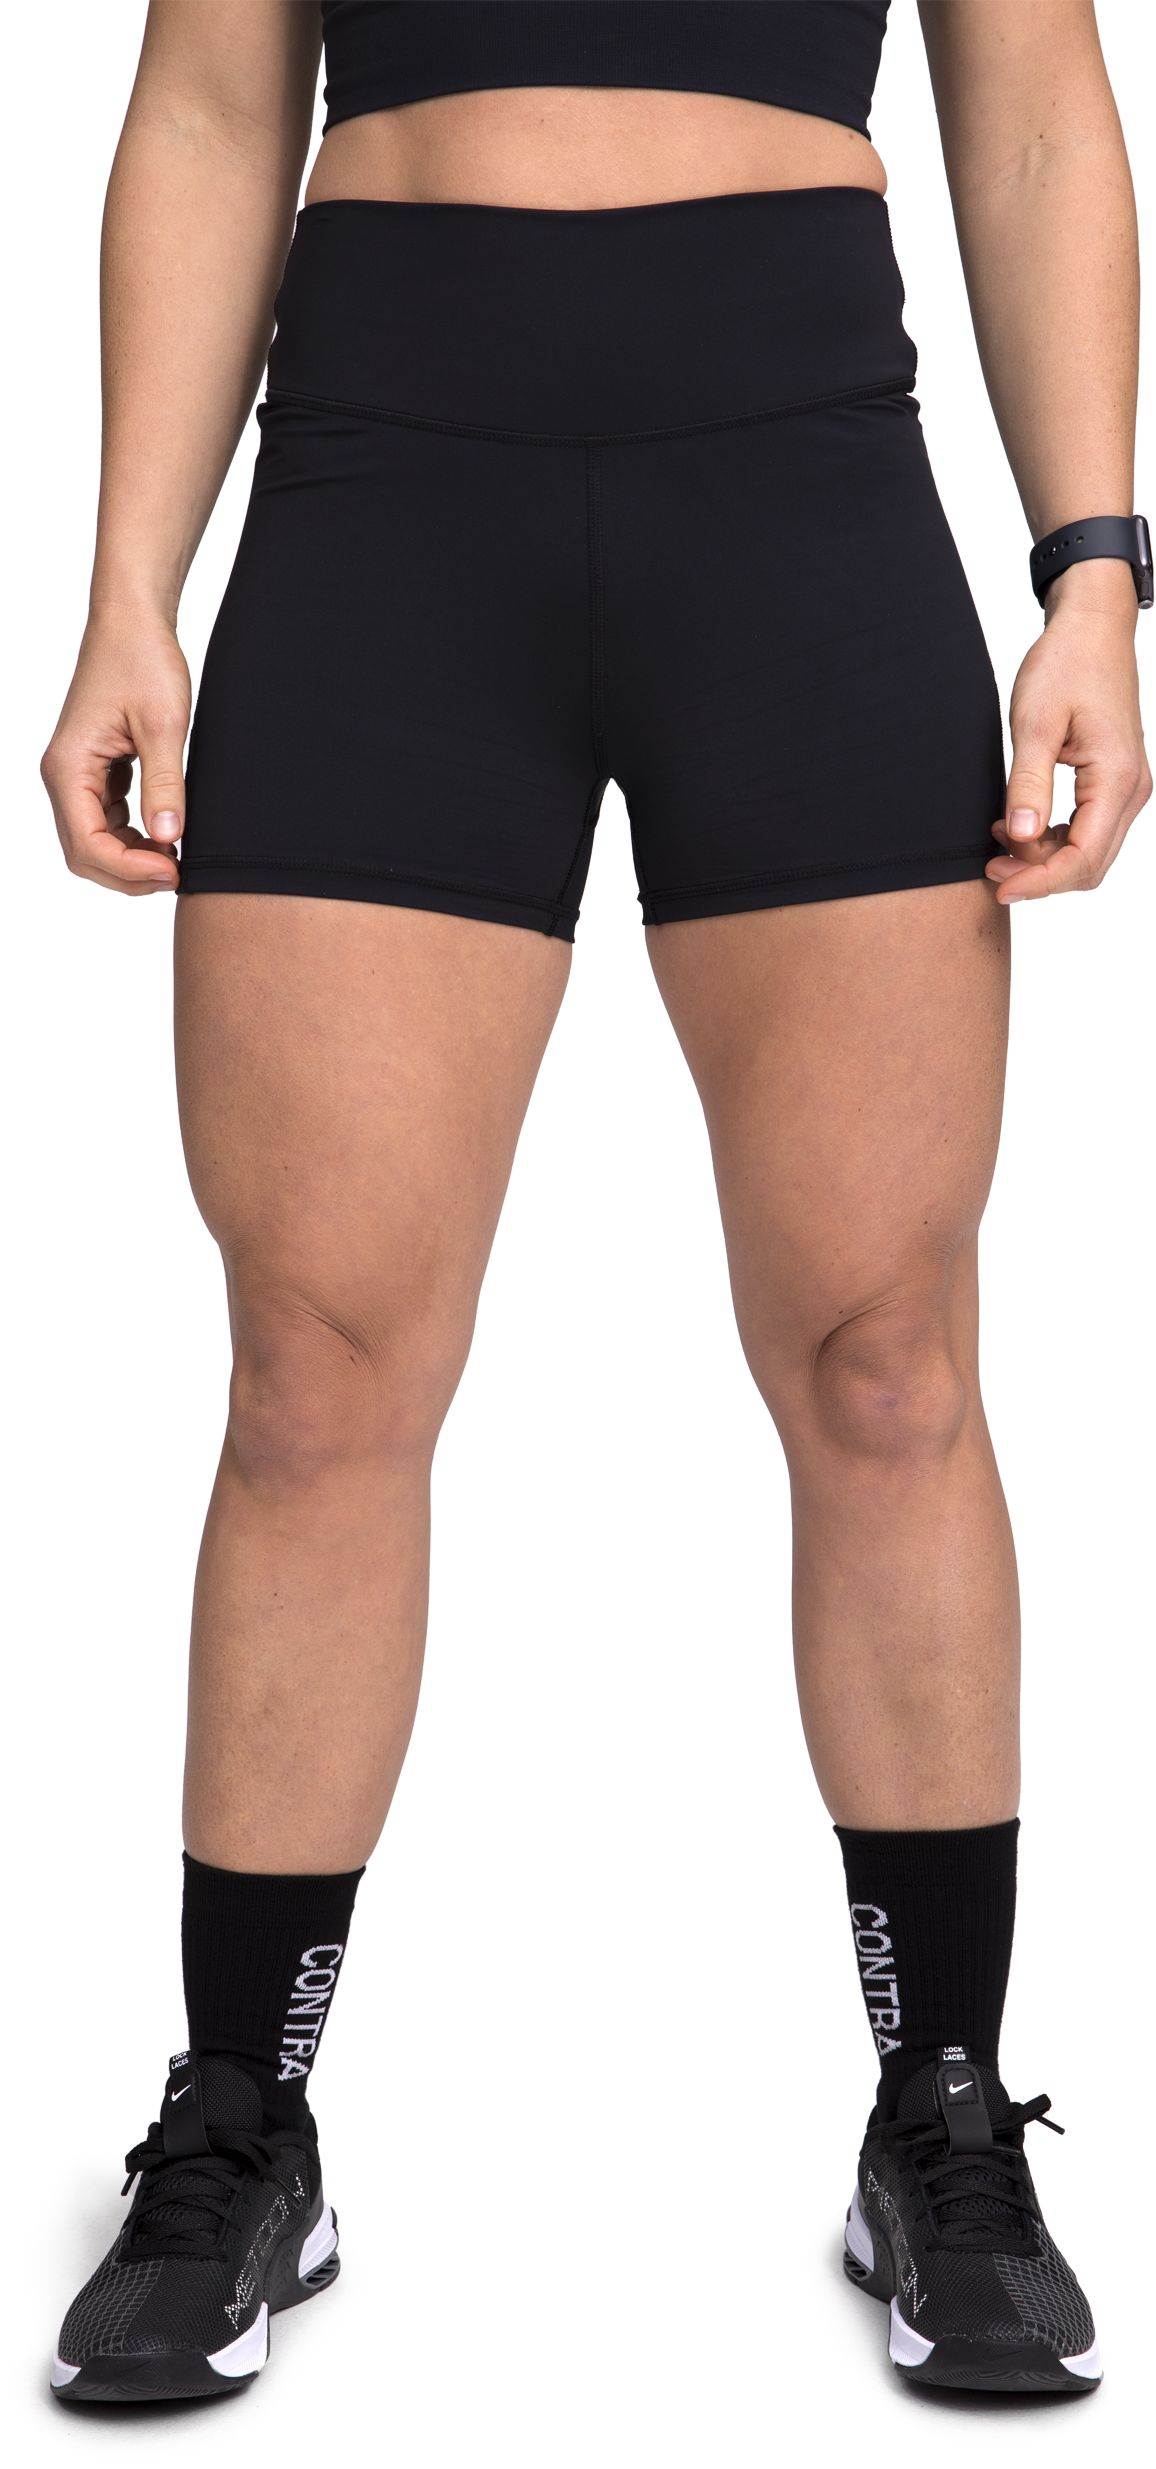 CONTRA, W CLEAN SHORTS